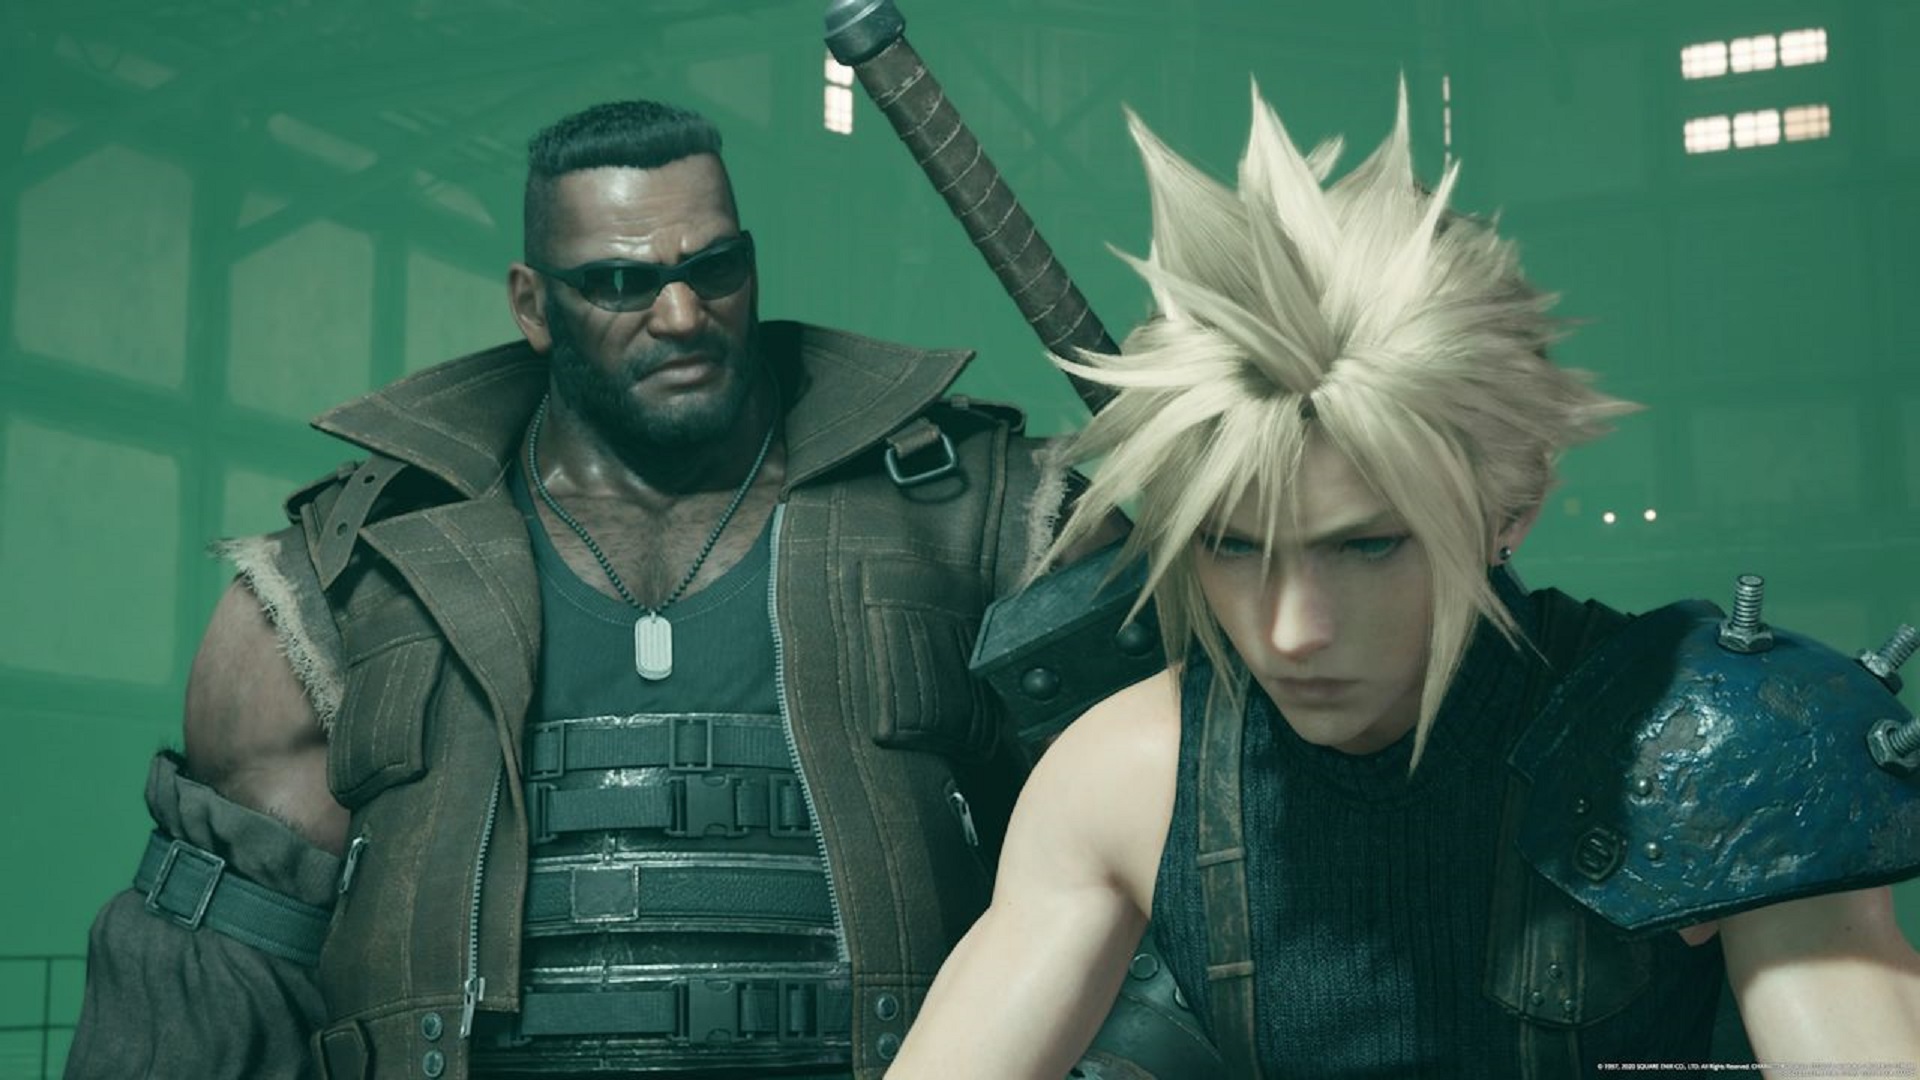 Final Fantasy VII Remake's Co-Director will reveal new information abo...